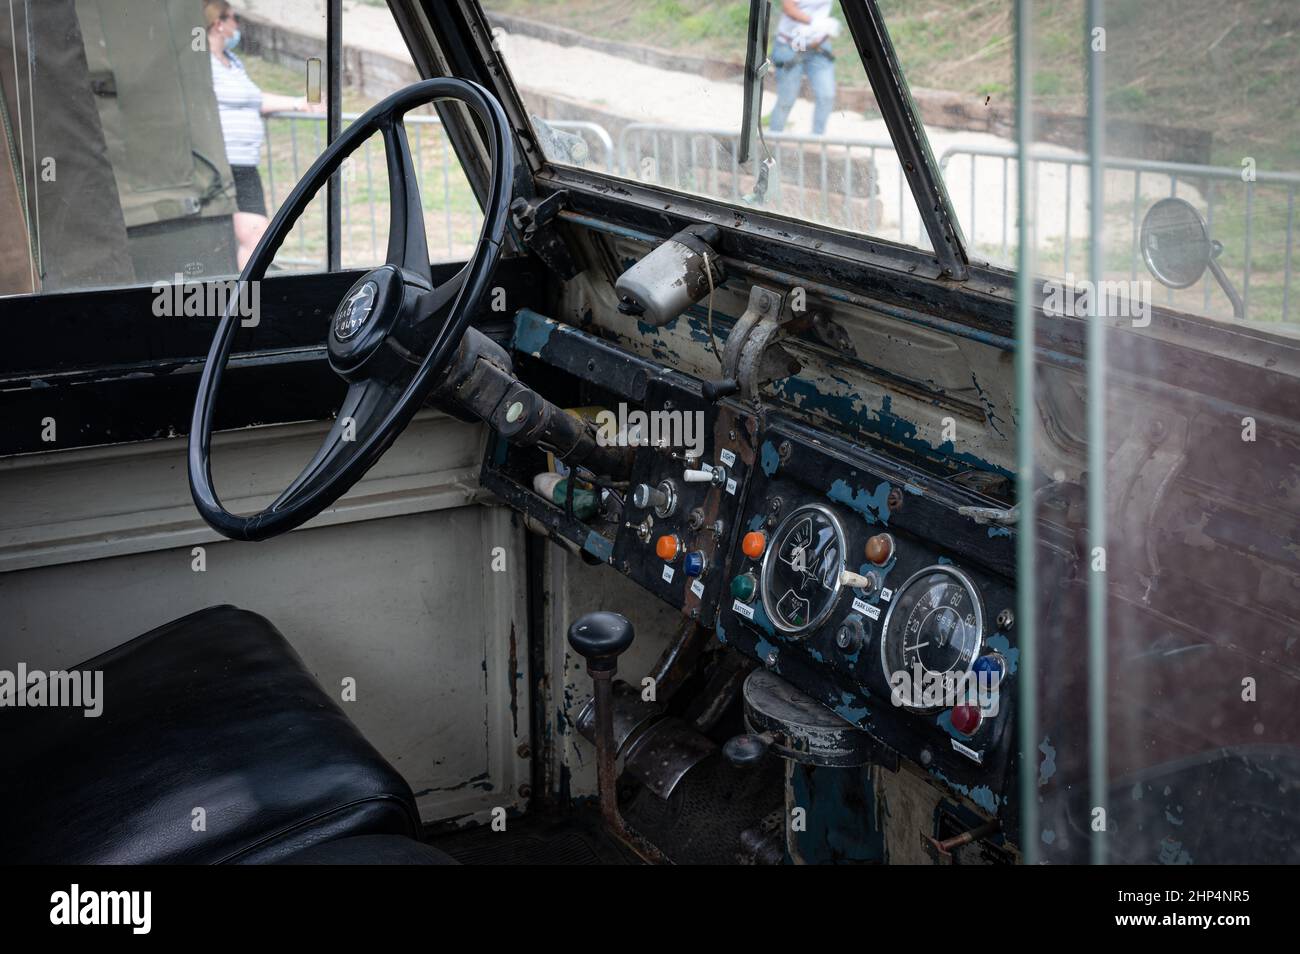 View of the Interior cabin of a Land Rover Santana vehicle in Suria, Spain Stock Photo